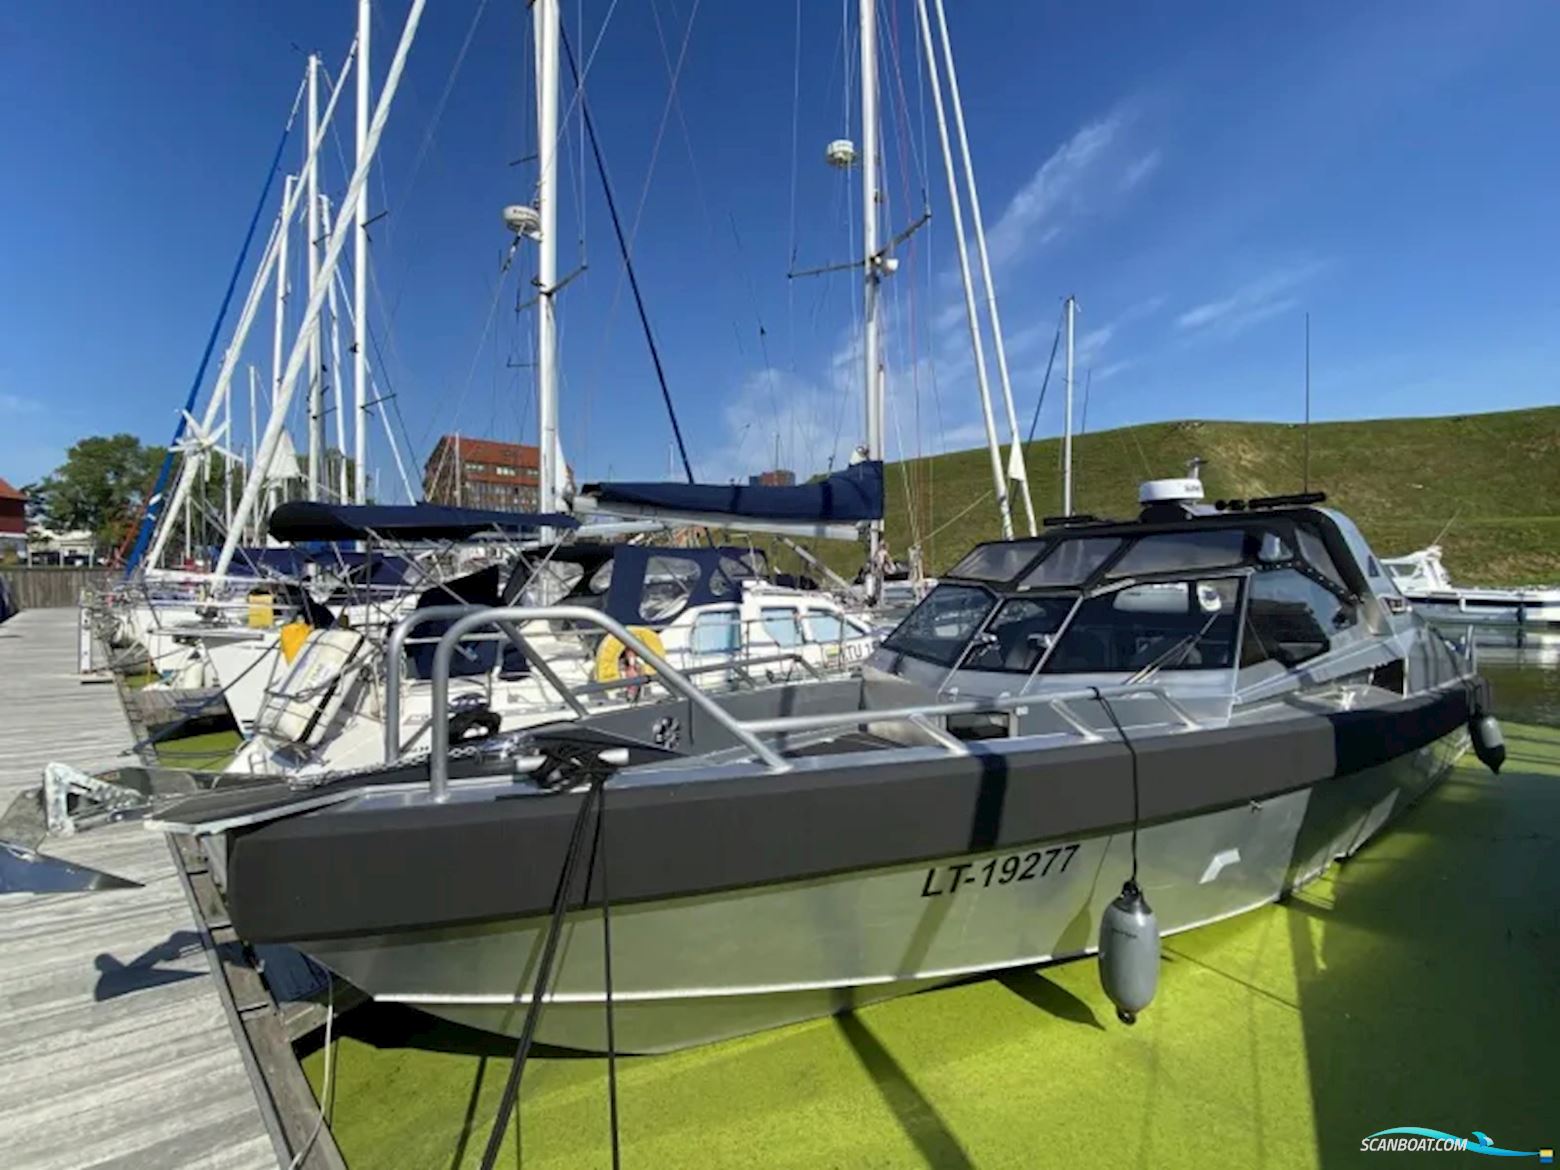 Anytec 1221Spd Motor boat 2017, with Mercury engine, Sweden